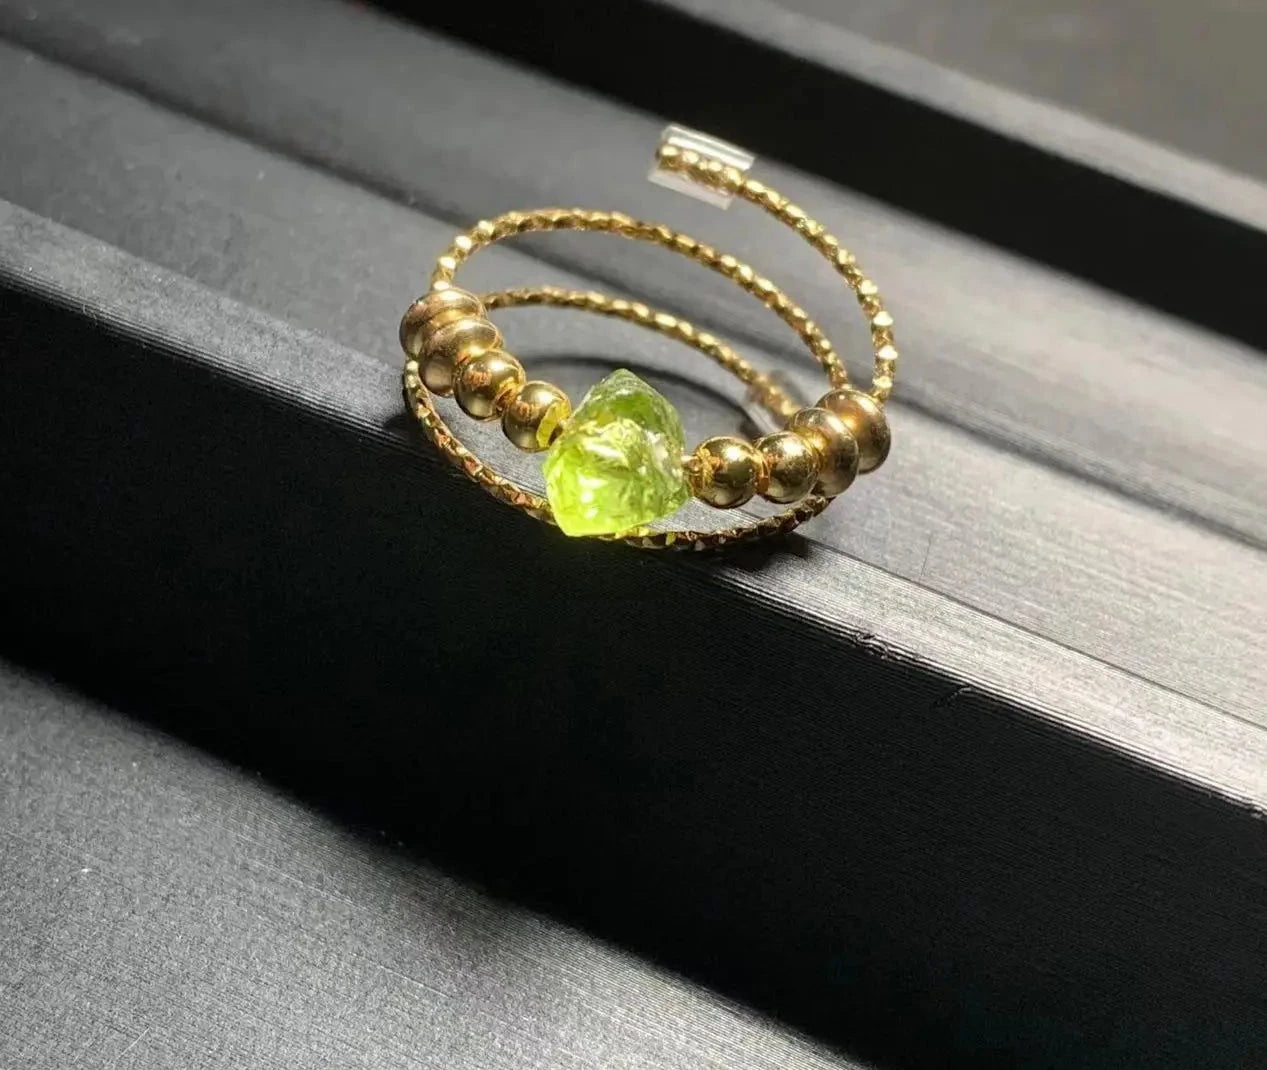 Vintage Natural Peridot Ring For Women 18K Gold Stainless Steel Simple Fine Jewelry Stone